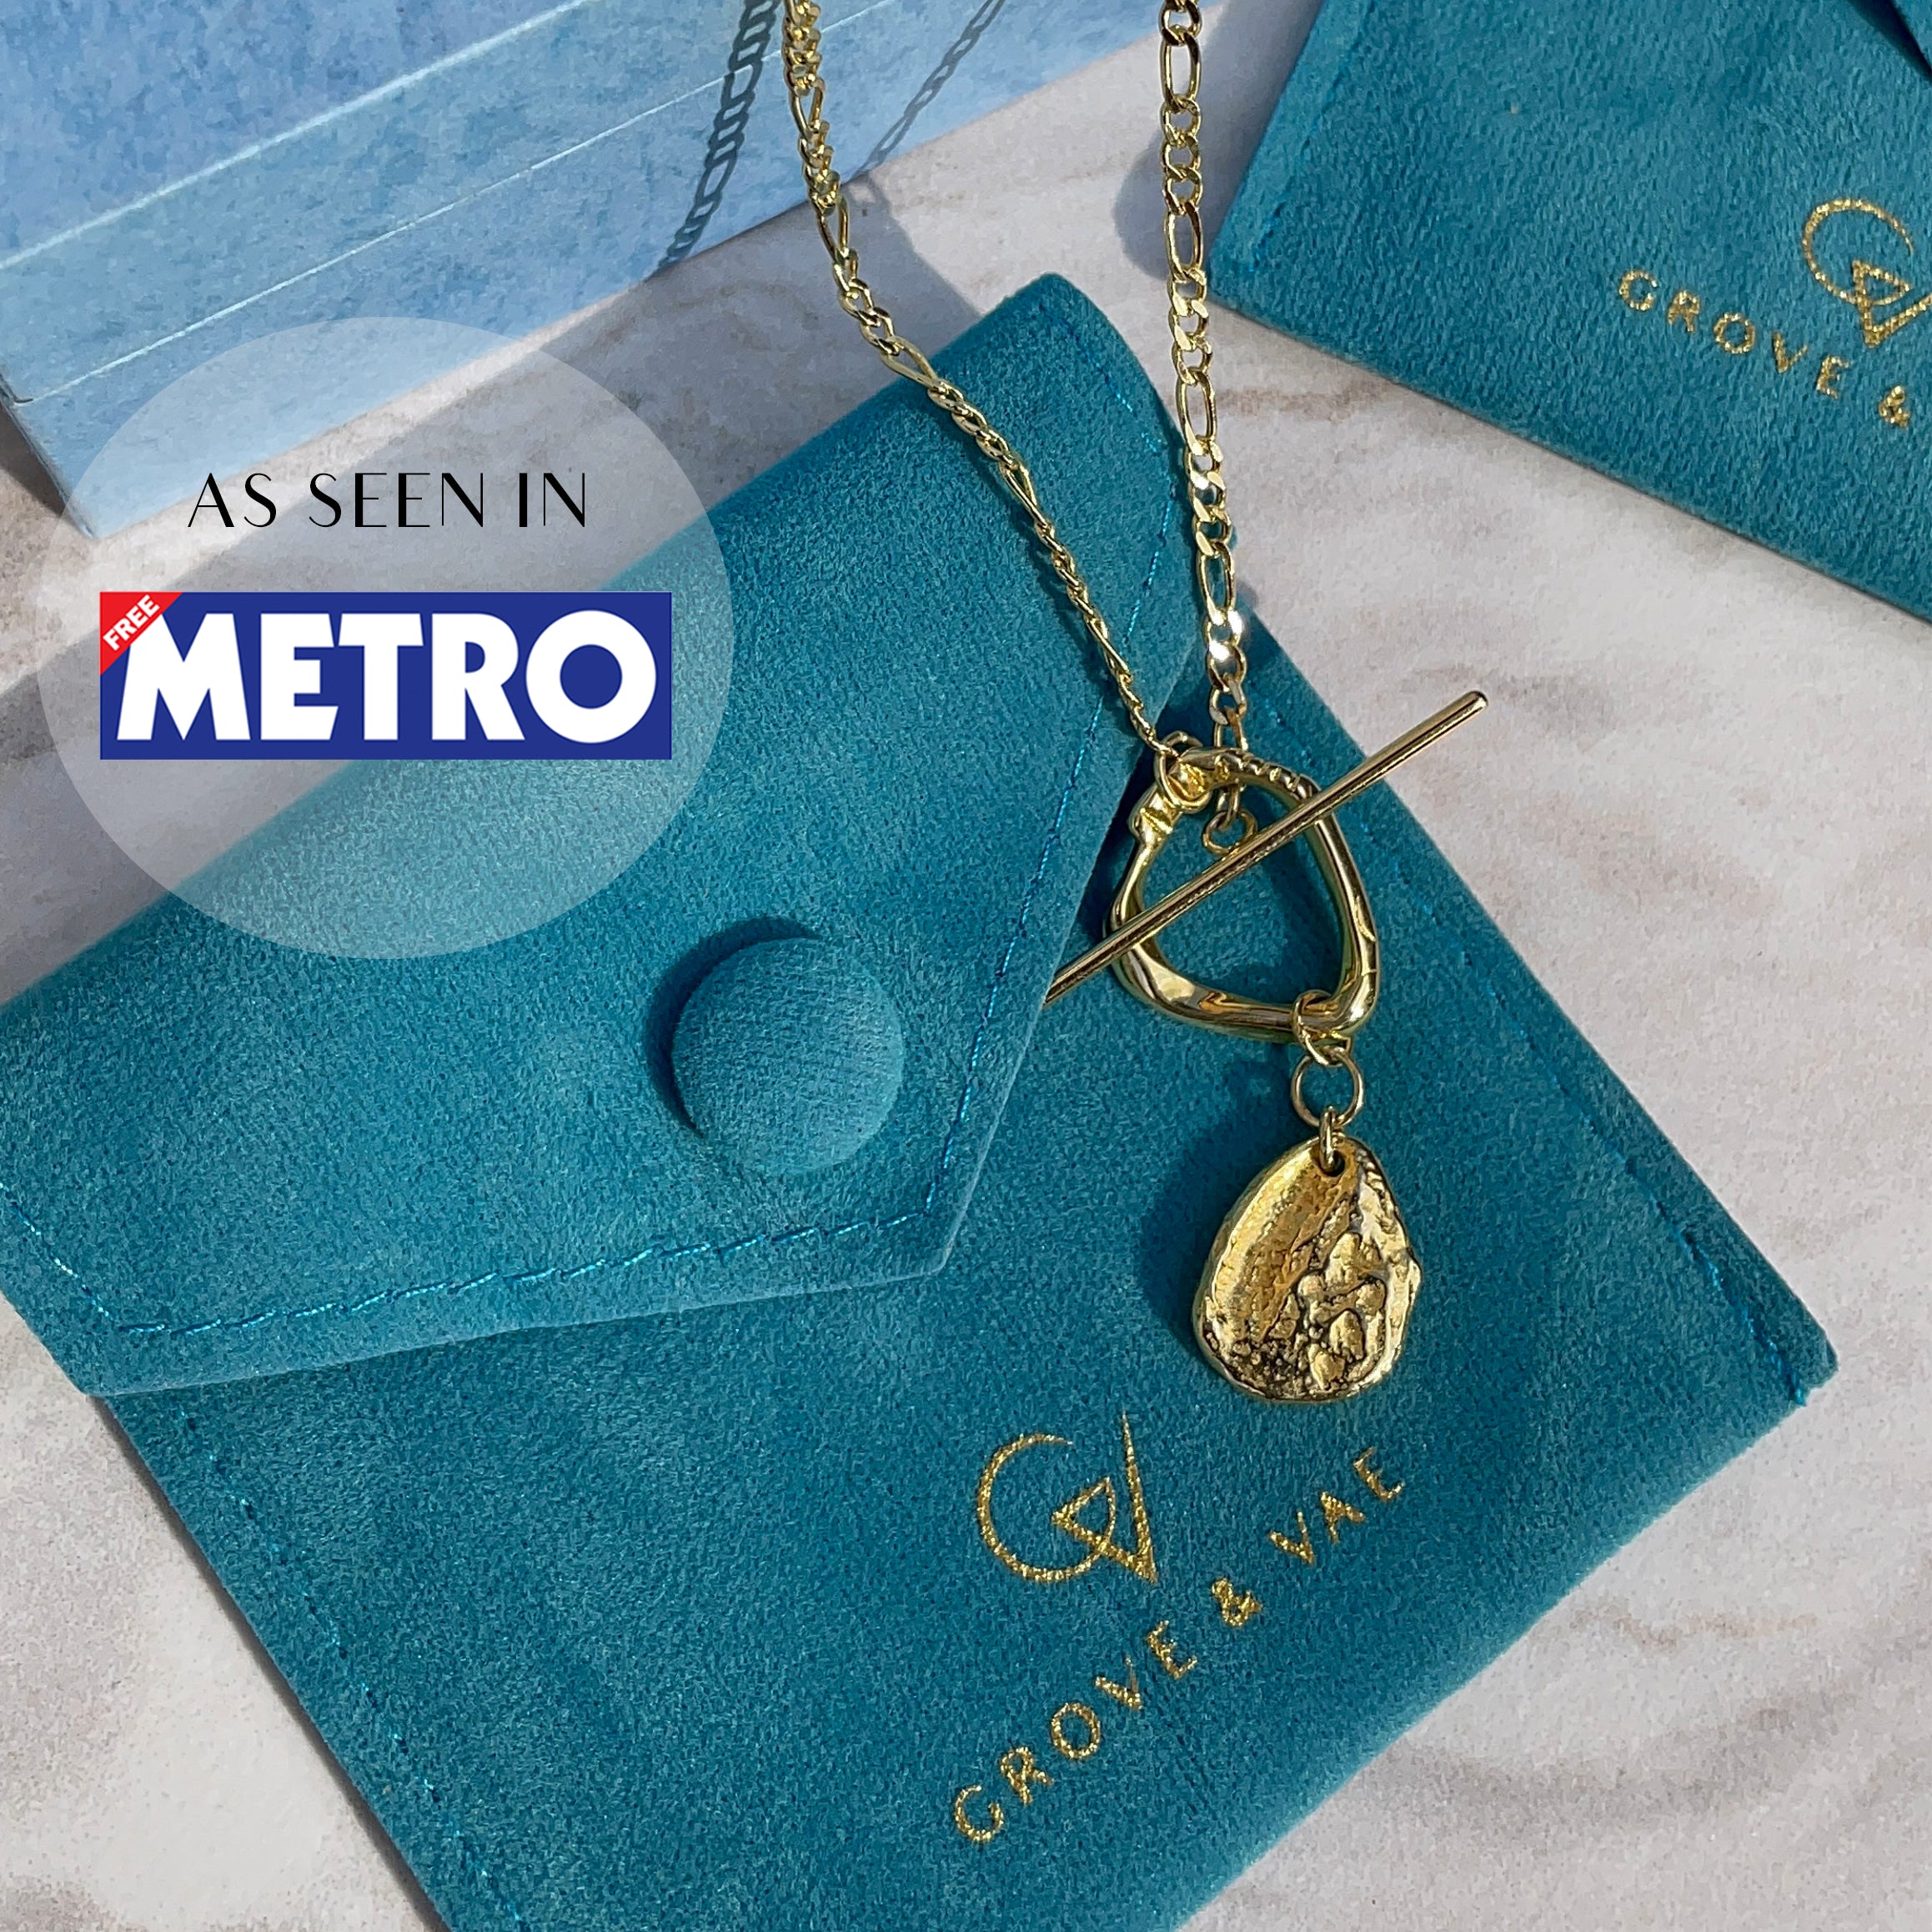 Verona Gold Figaro T-Bar Necklace on Grove & Vae Pouch with as seen in Metro newspaper sticker